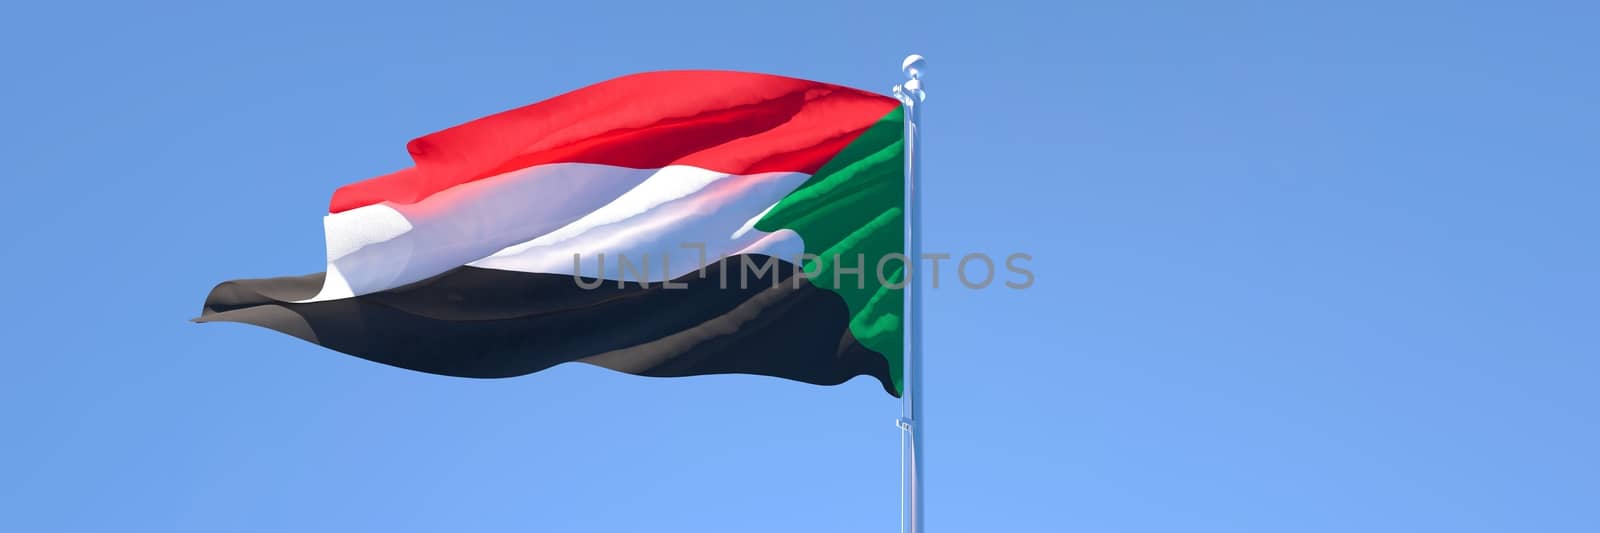 3D rendering of the national flag of Sudan waving in the wind against a blue sky